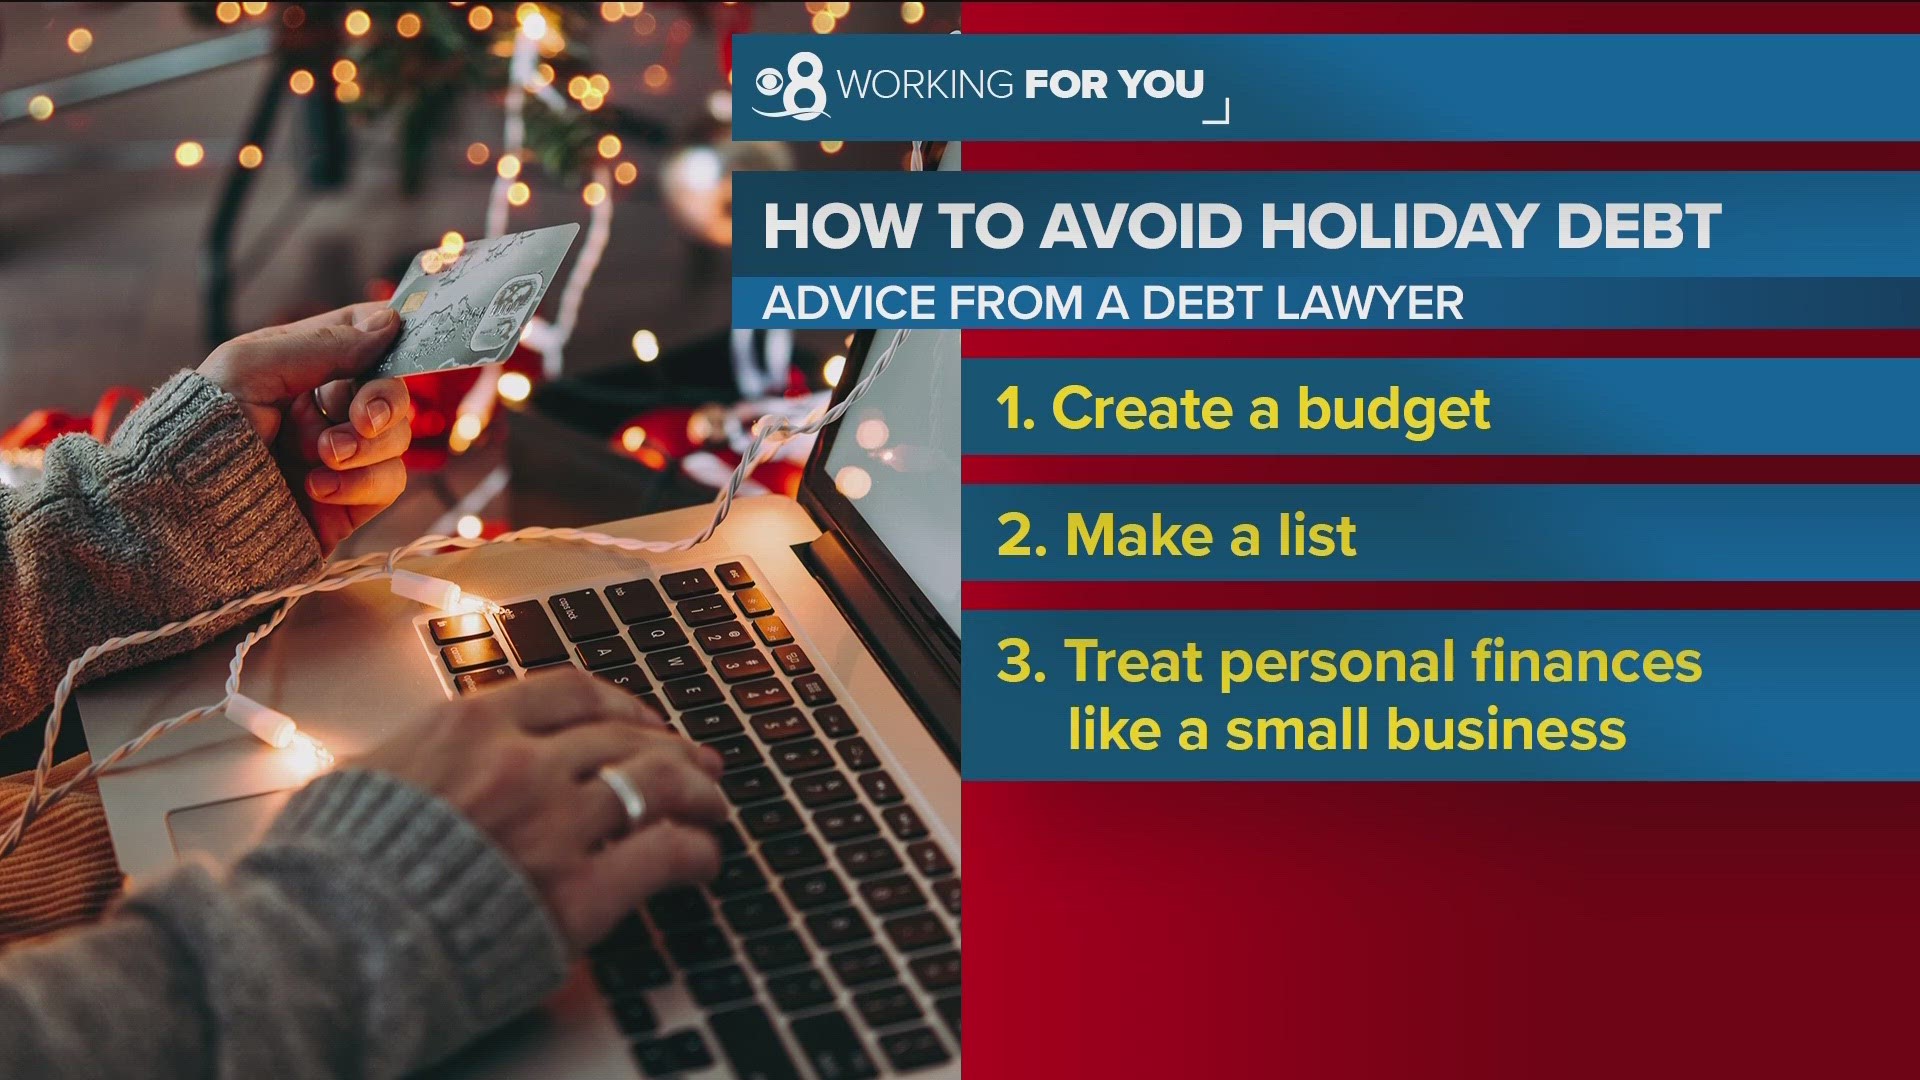 Now that holiday shopping season is here, financial experts are warning against falling into the debt trap.